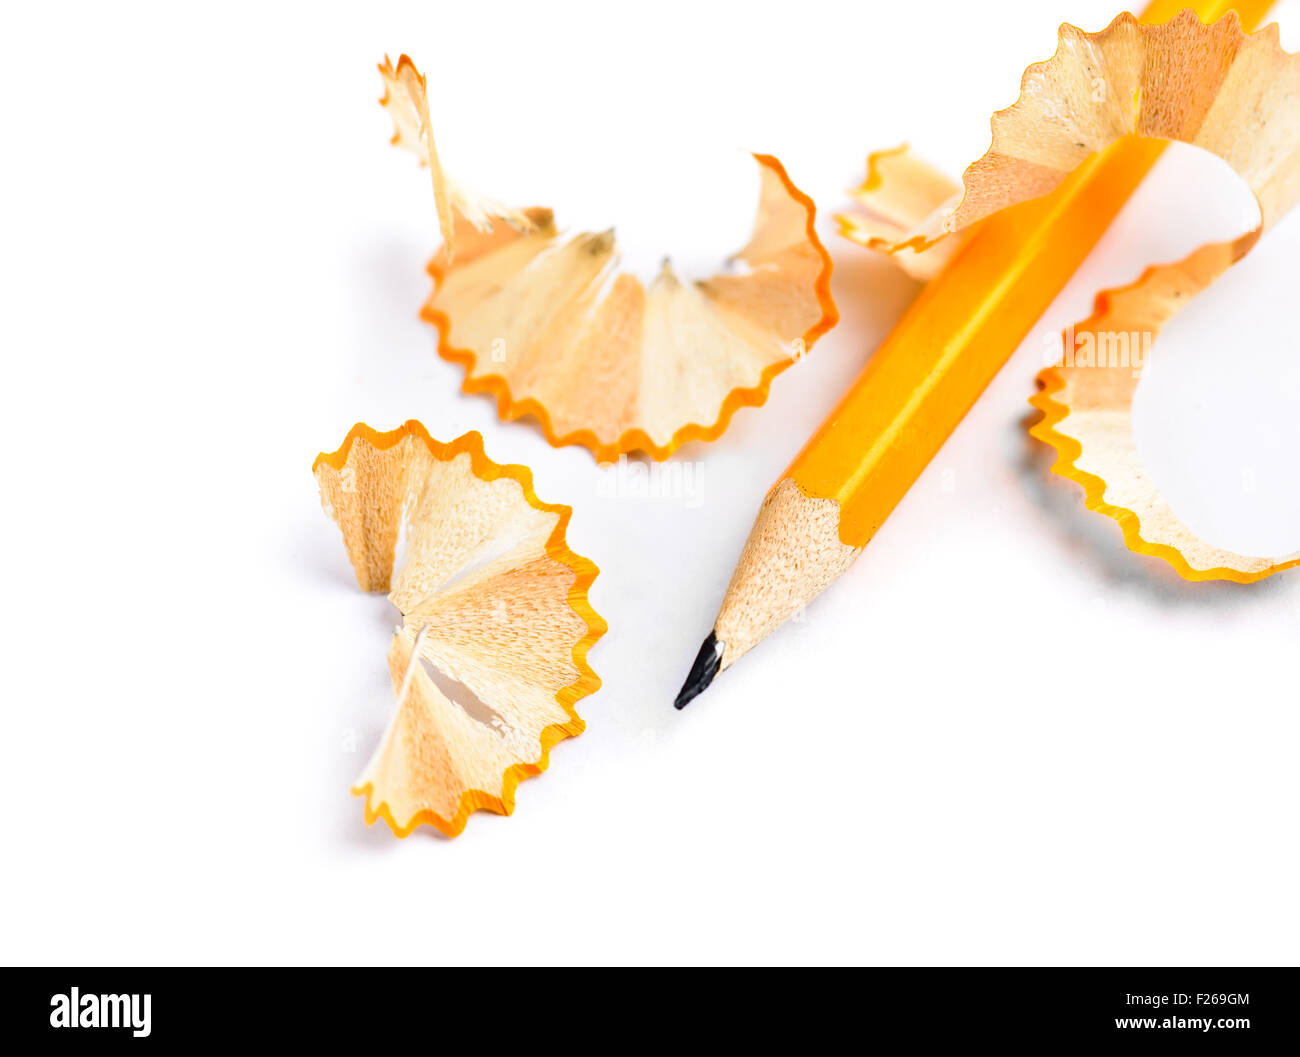 Sharpened pencil and wood shavings isolated Stock Photo